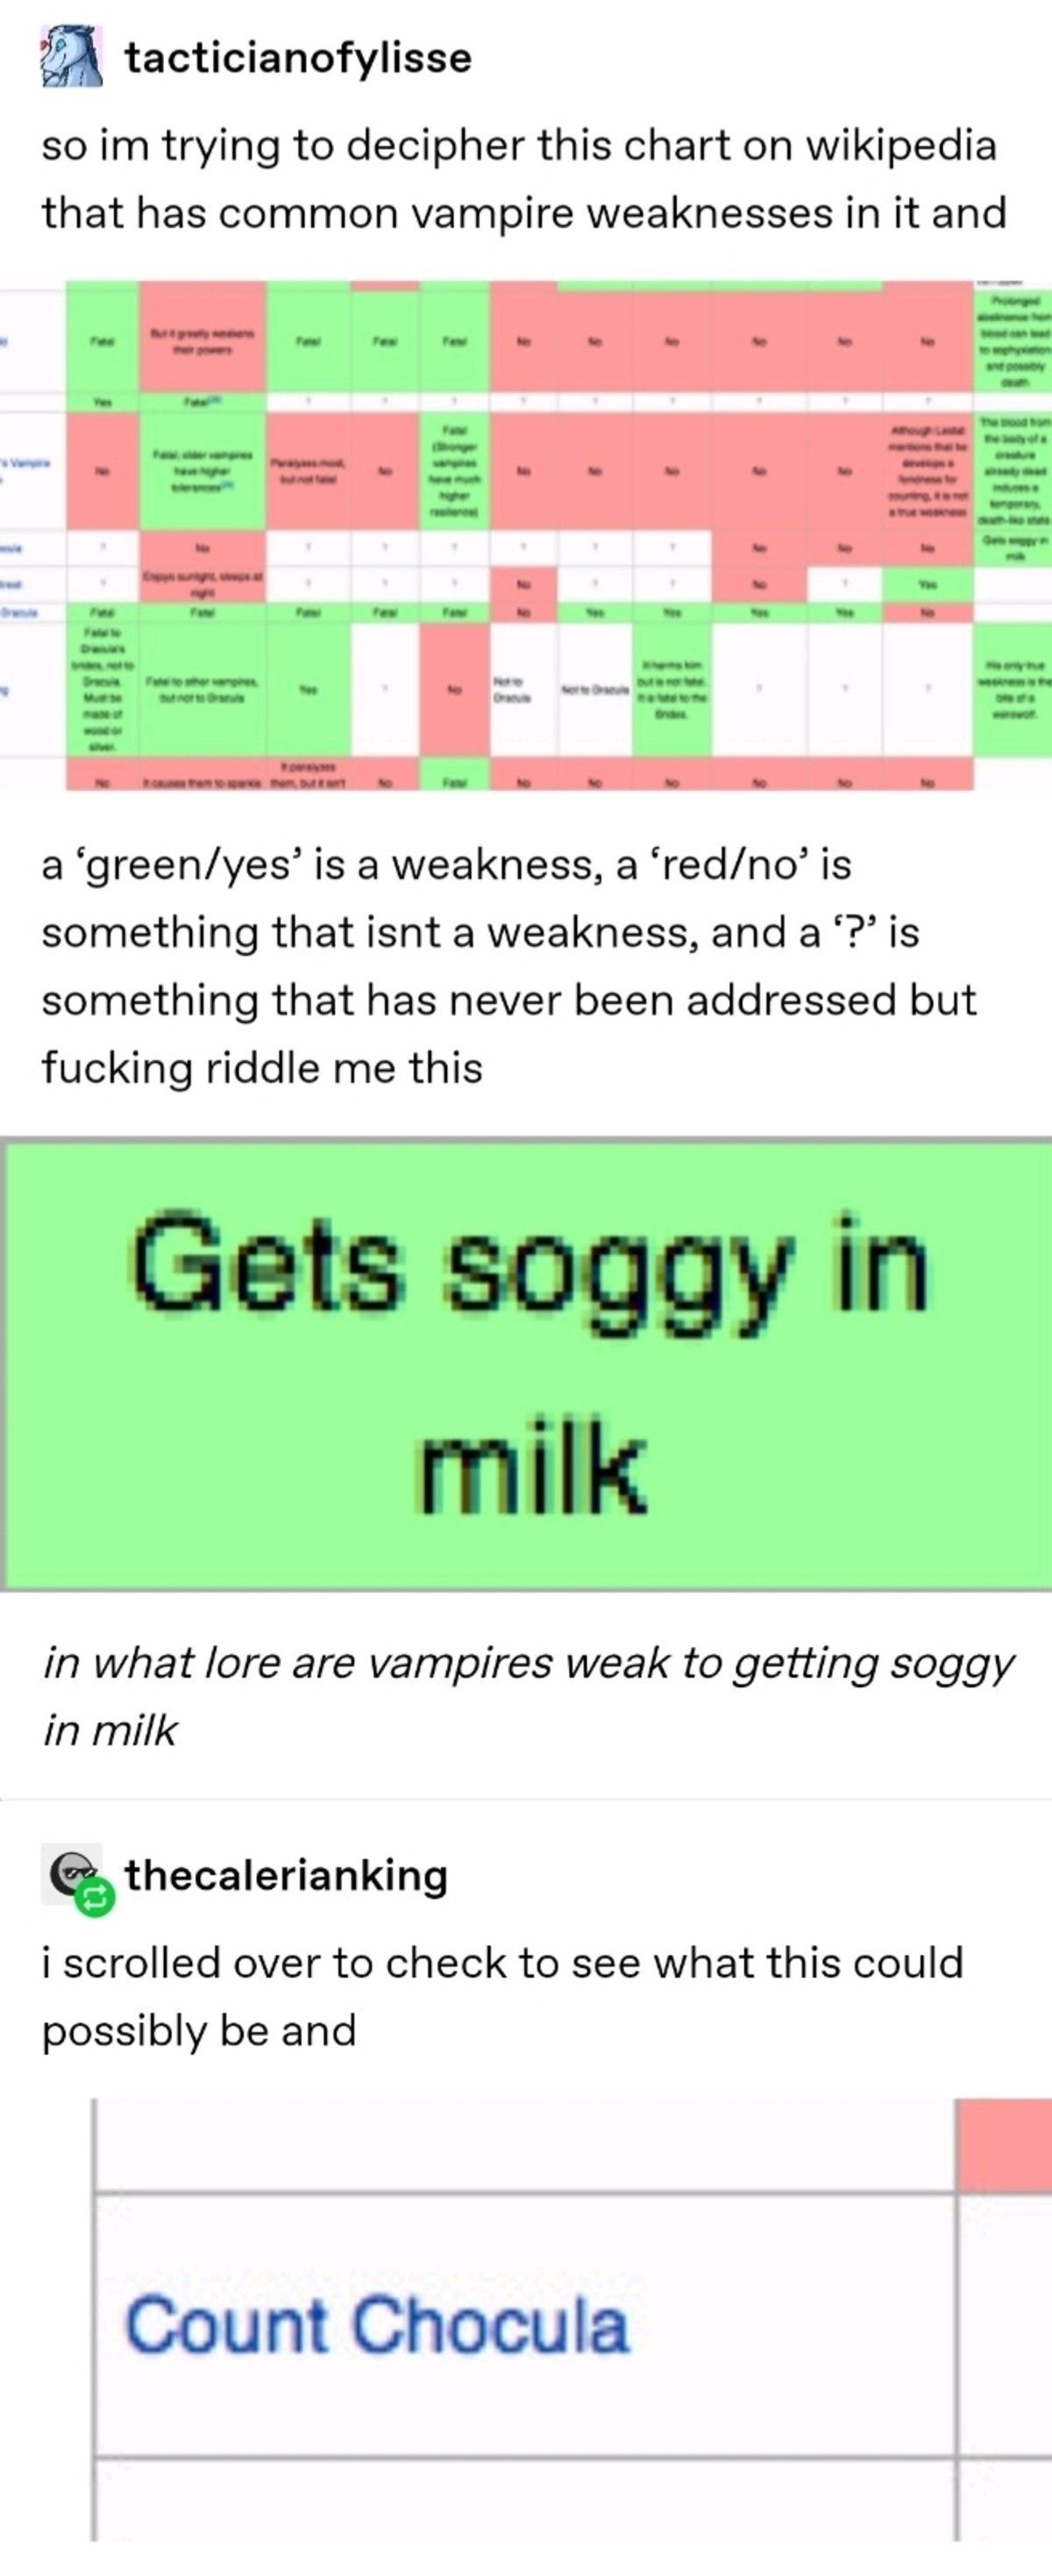 Do you think vampires can life off of sucking tits?